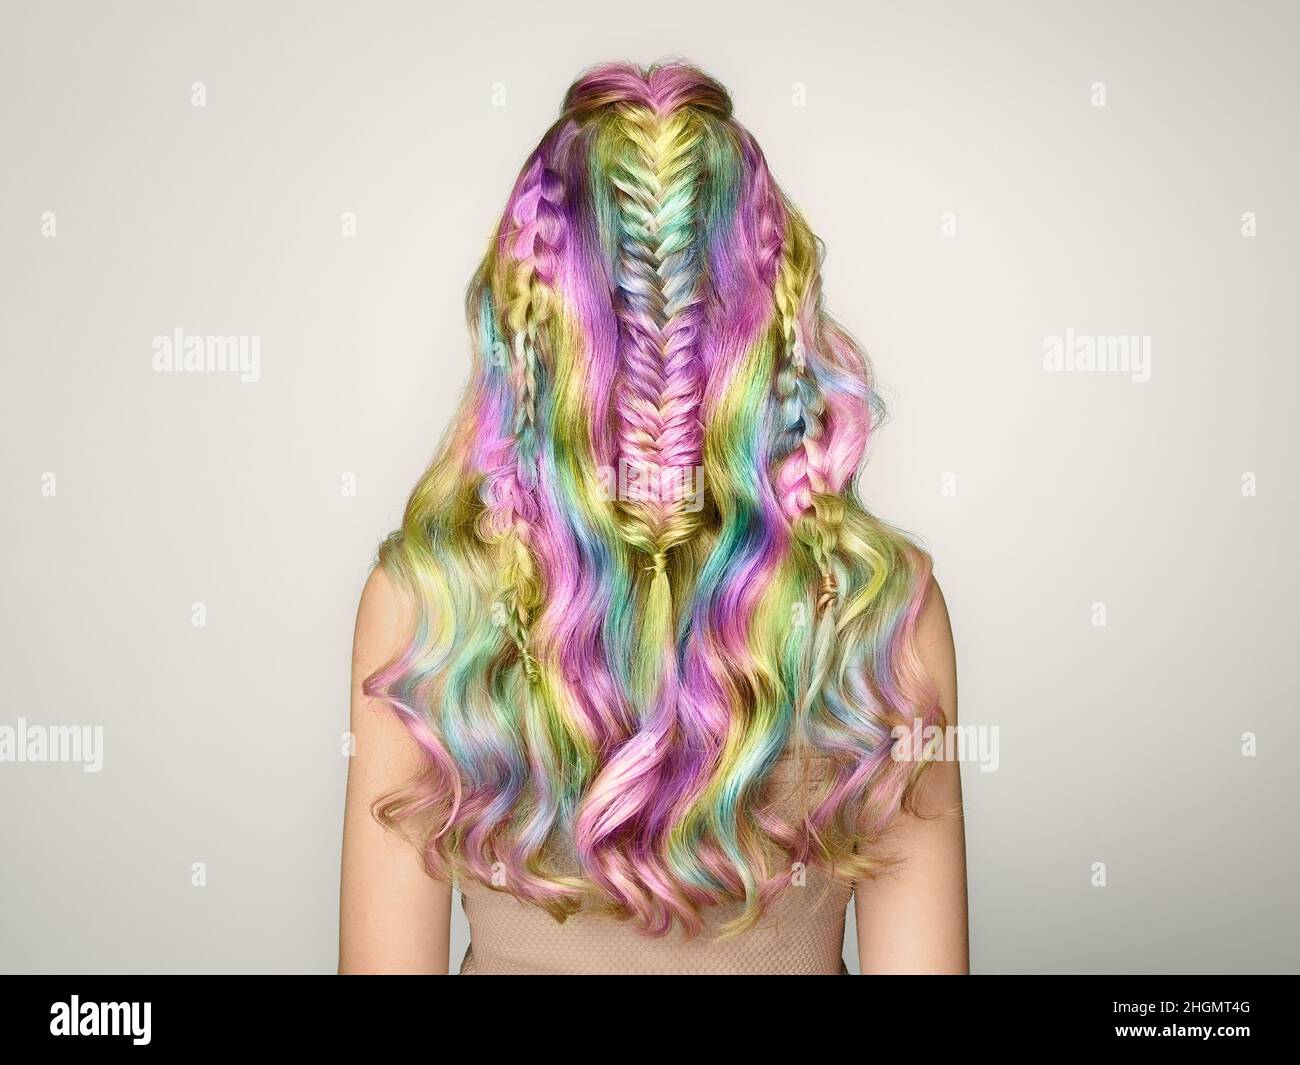 Beauty Fashion Model Girl with Colorful Dyed Hair. Girl with perfect  Hairstyle. Model with perfect Healthy Dyed Hair. Rainbow Hairstyles Stock Photo